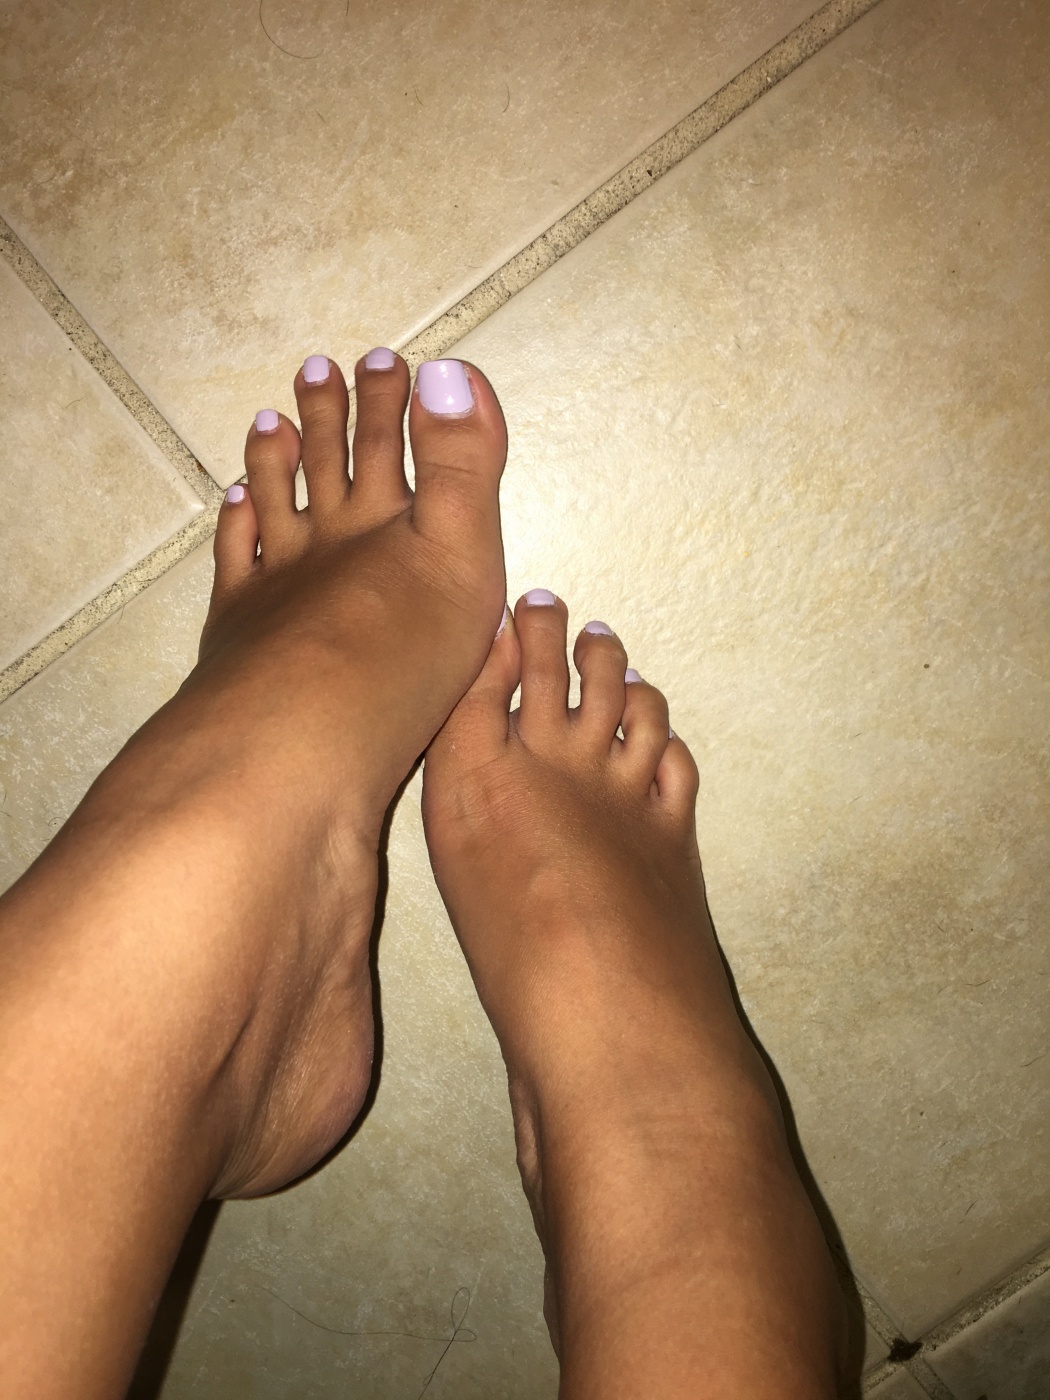 Foot Pictures for Your Satisfact…